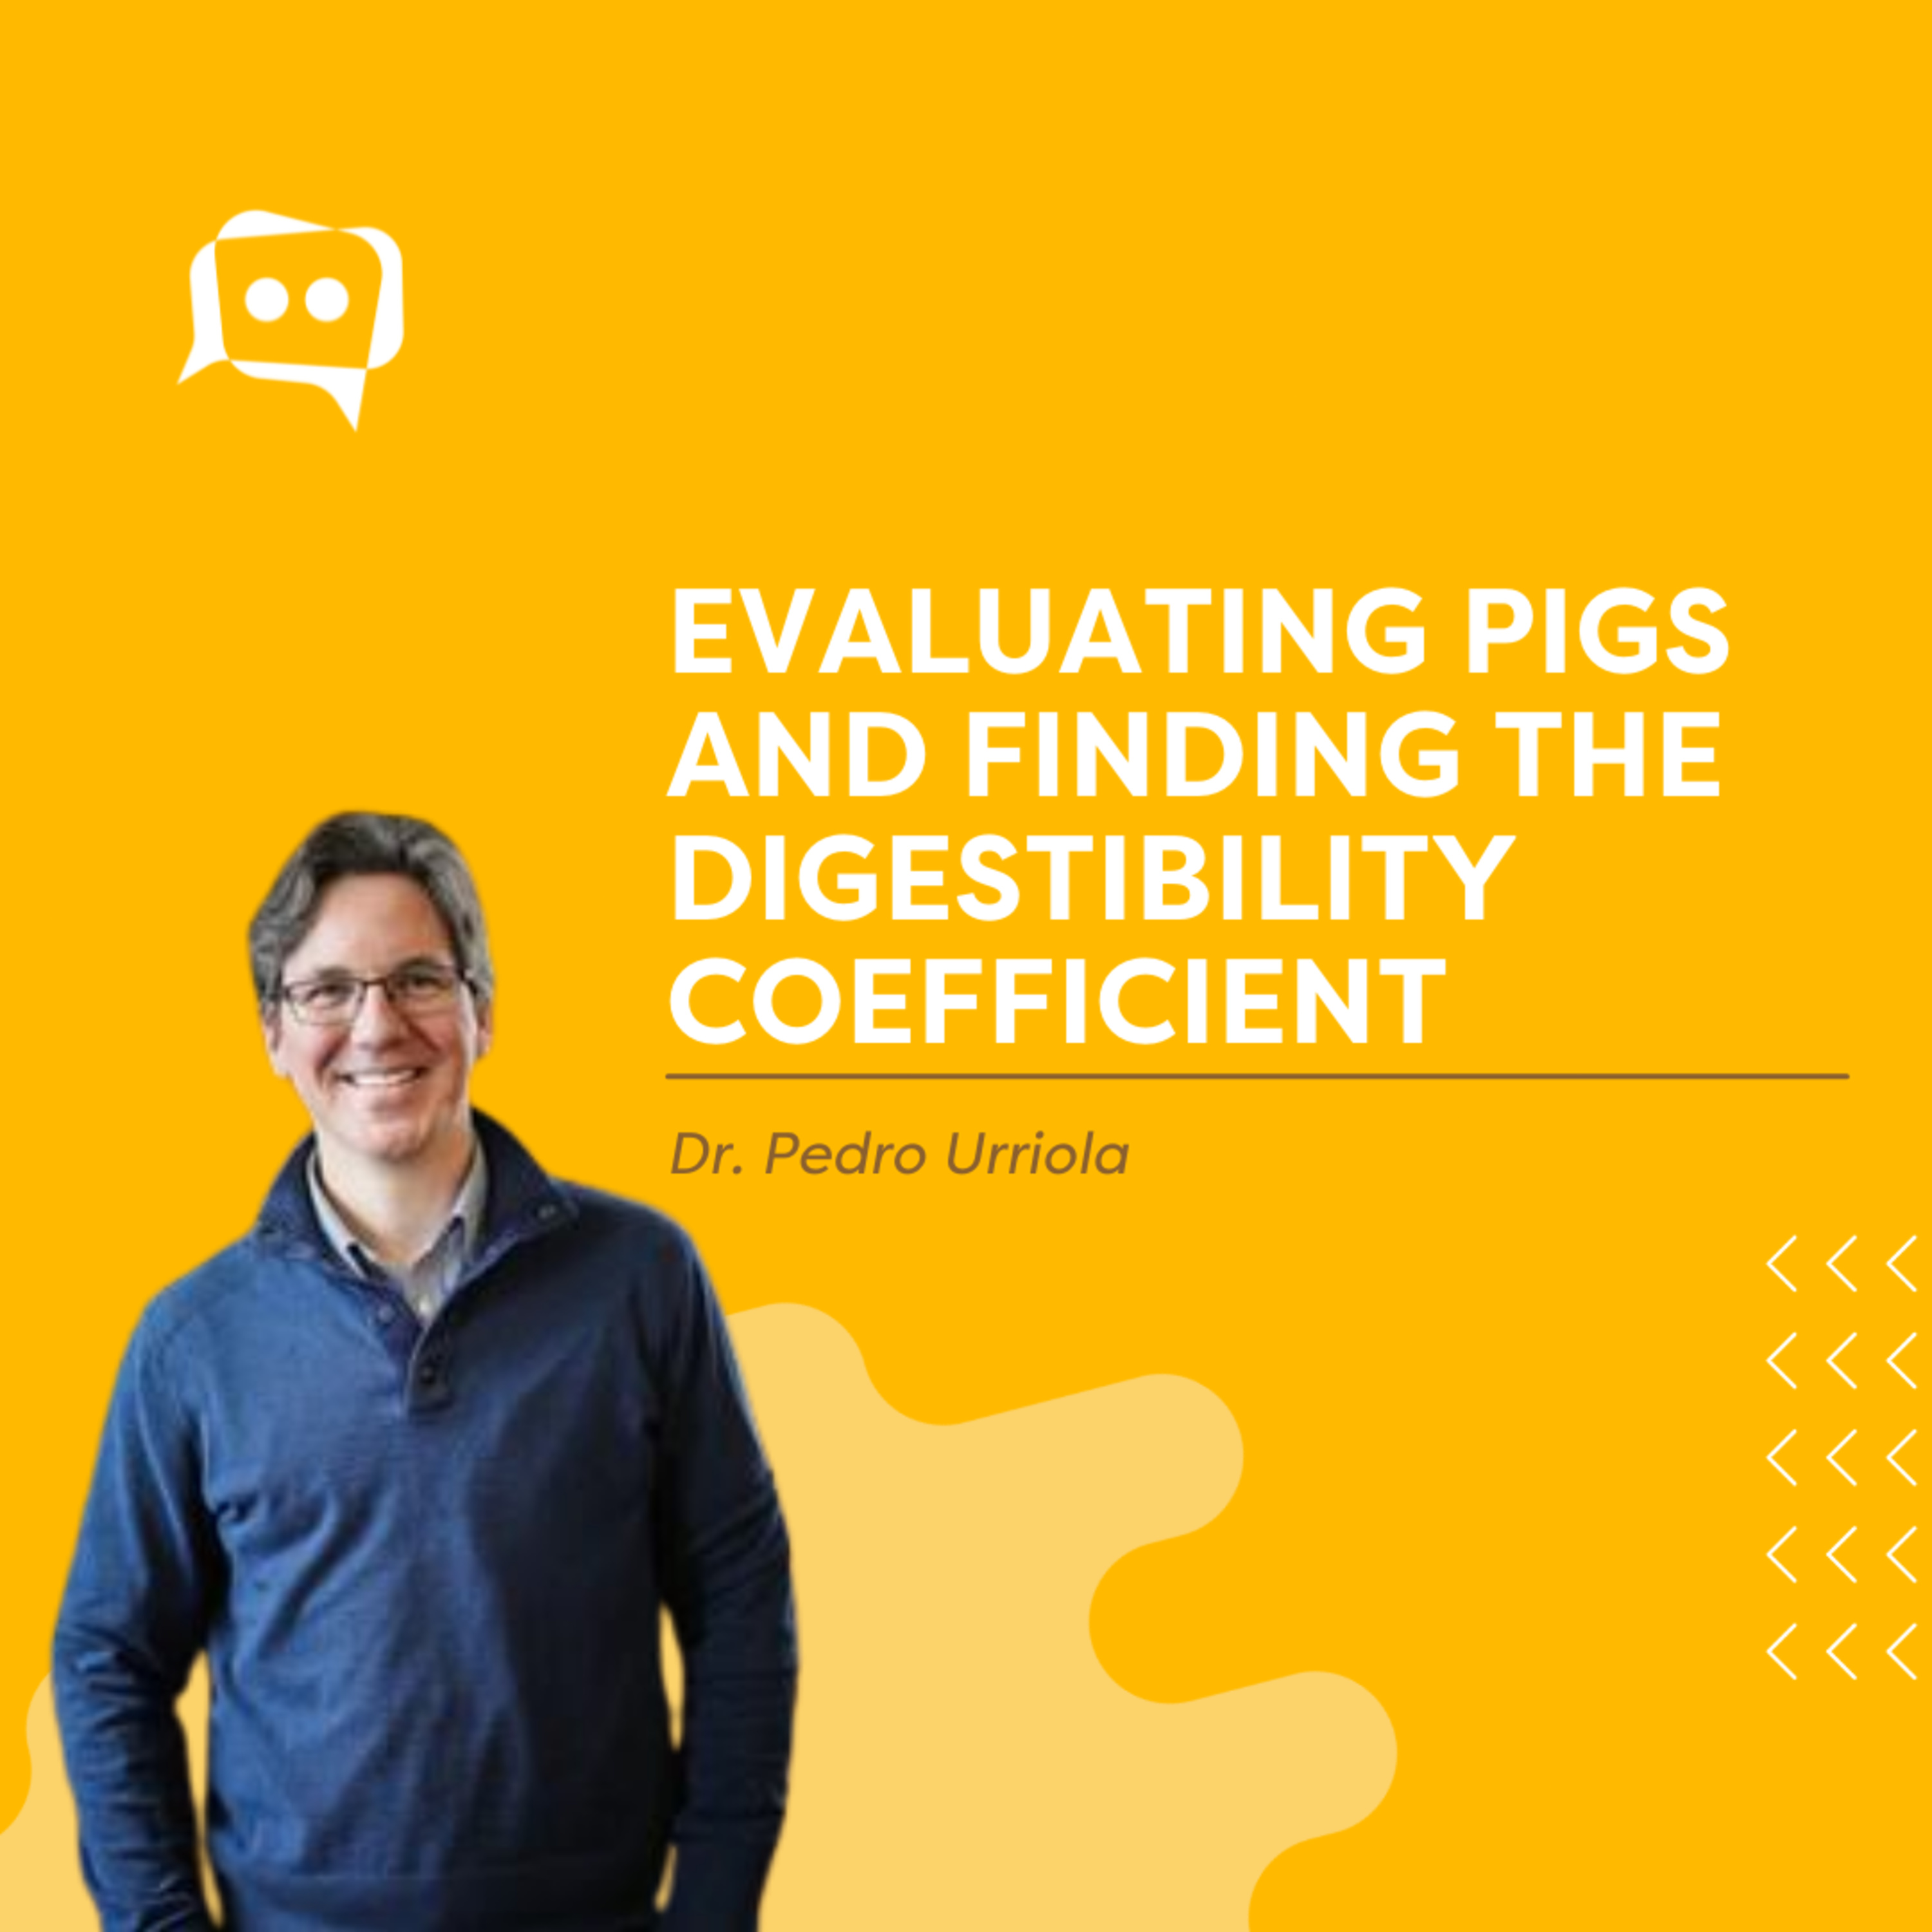 #SHORTS: Evaluating pigs and finding the digestibility coefficient, with Dr. Pedro Urriola